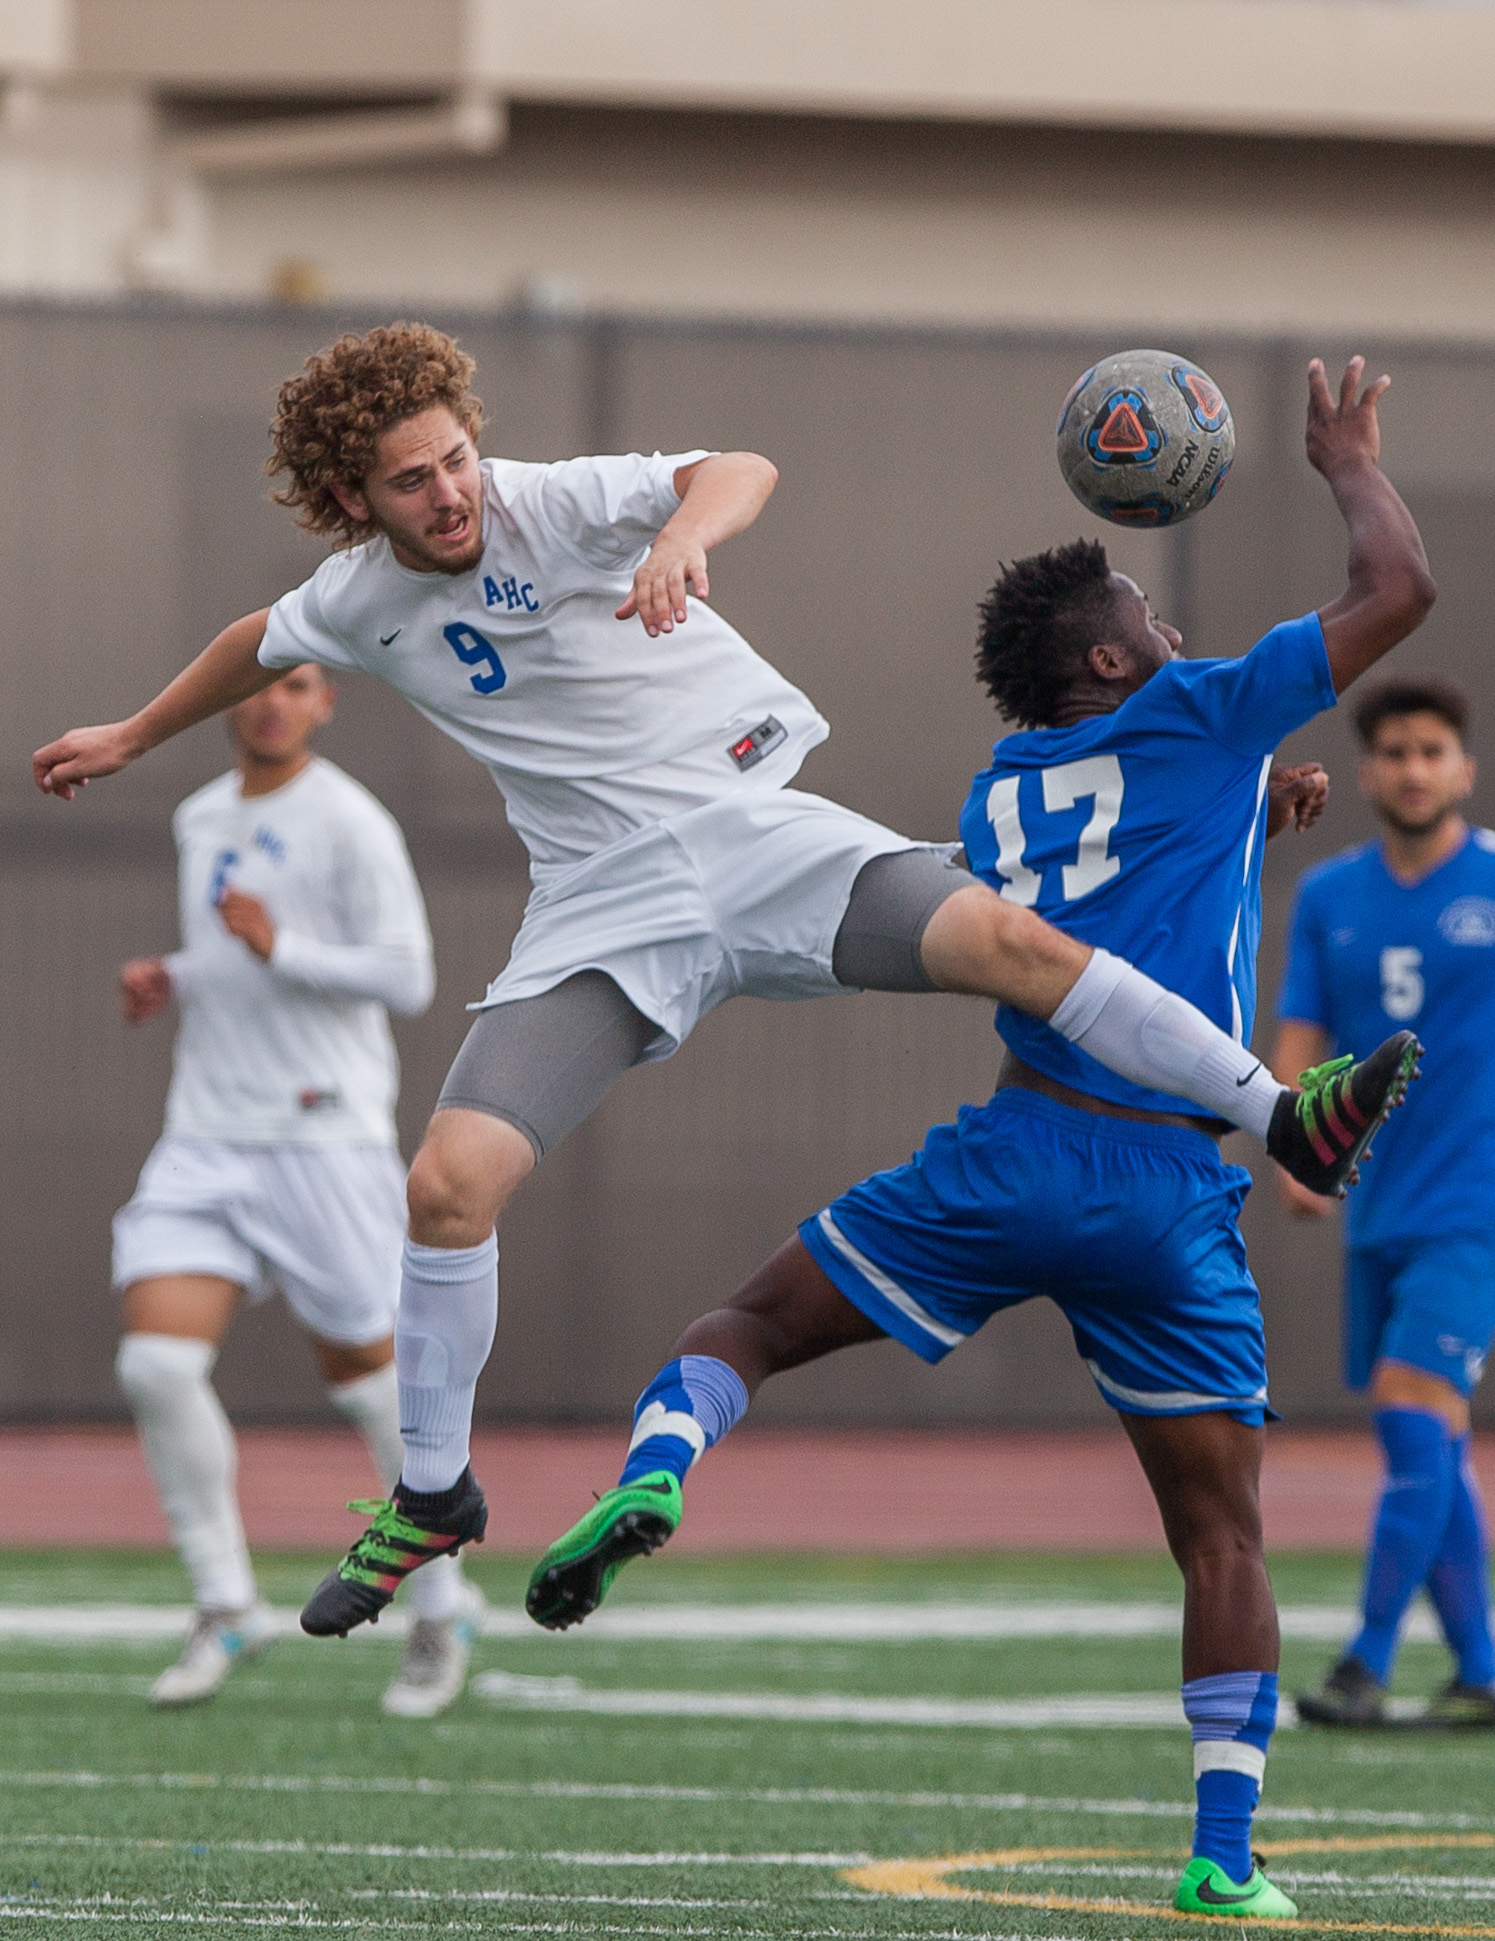  Cyrille Njomo (17) of the Santa Monica College jumps up to perform the ball. The game ended 1-1 resulting in a tie. The game was held at the Corsair Stadium at the Santa Monica College Main Campus in Santa Monica, California, on 31st of October, 201